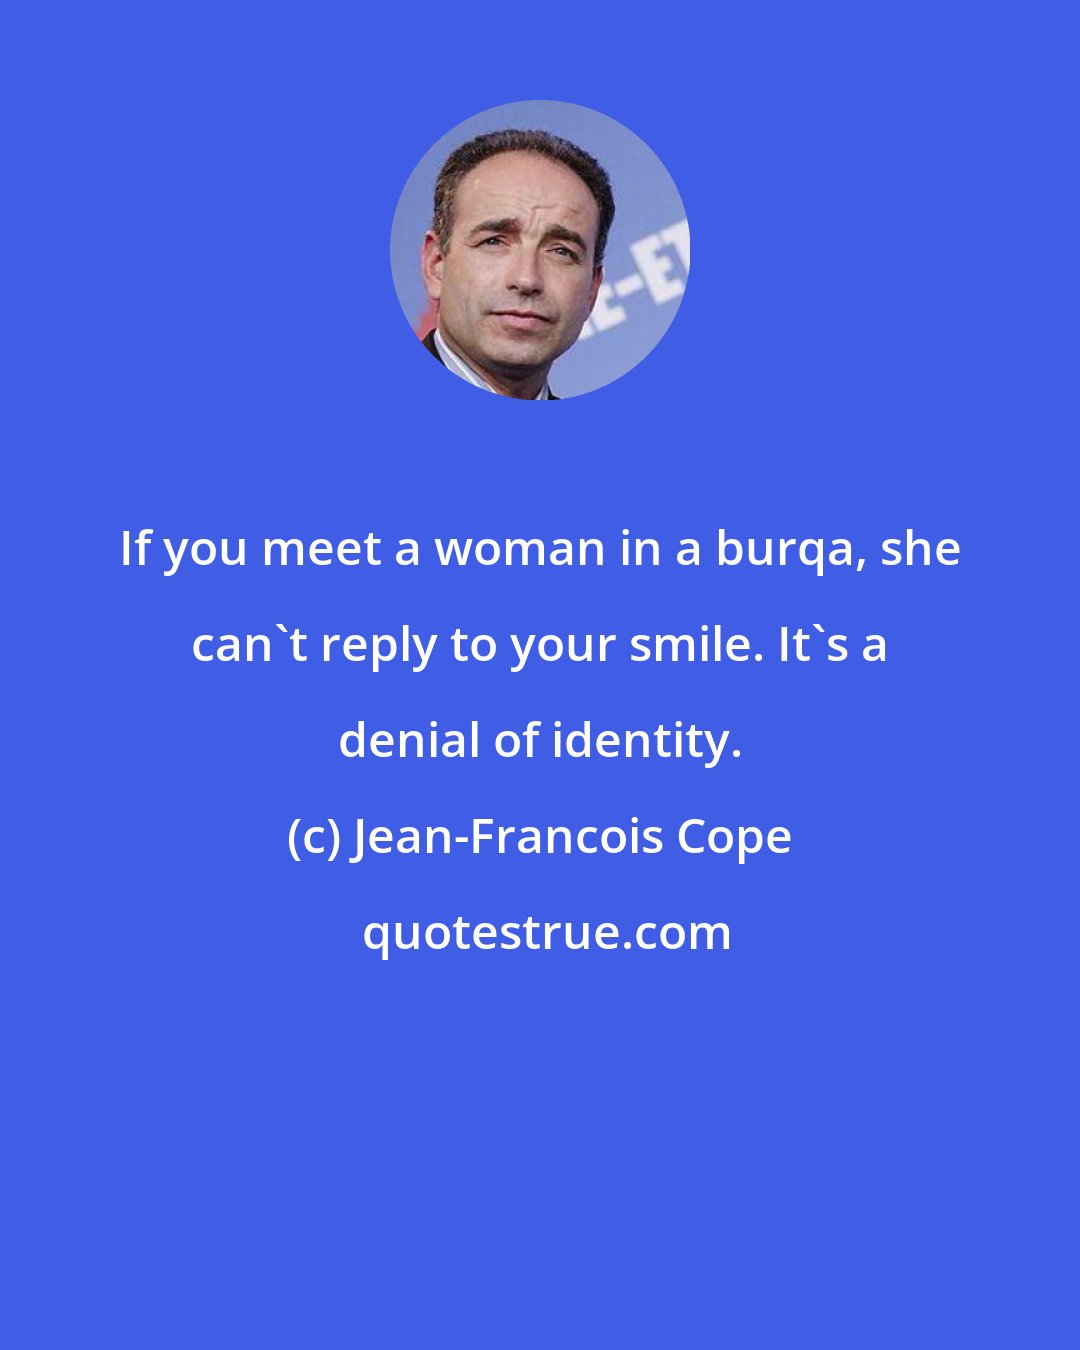 Jean-Francois Cope: If you meet a woman in a burqa, she can't reply to your smile. It's a denial of identity.